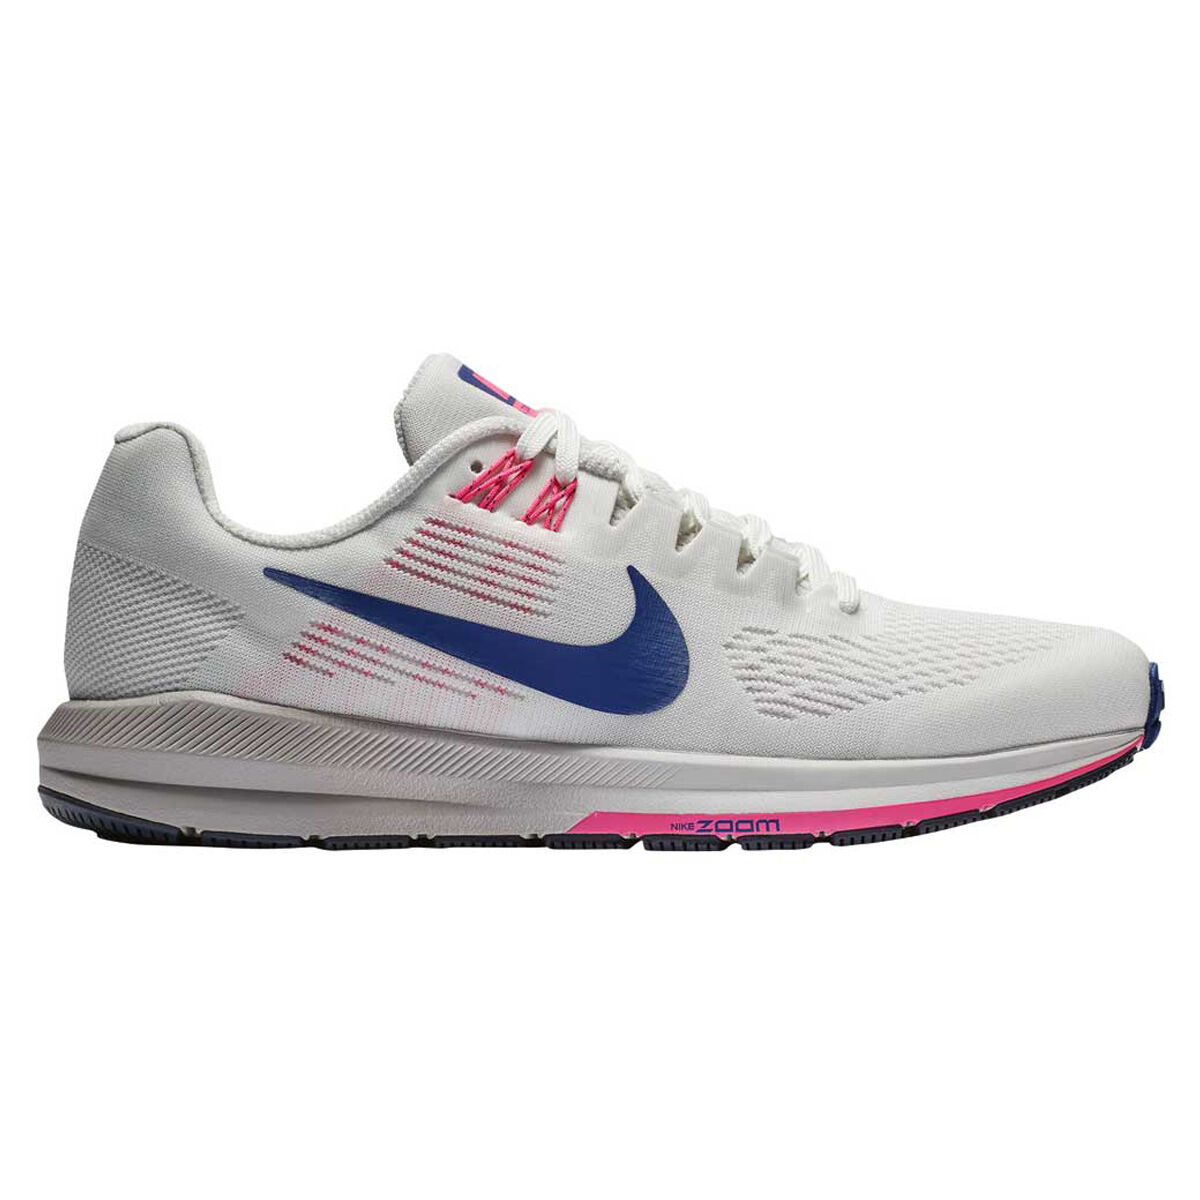 nike air zoom structure 21 women's